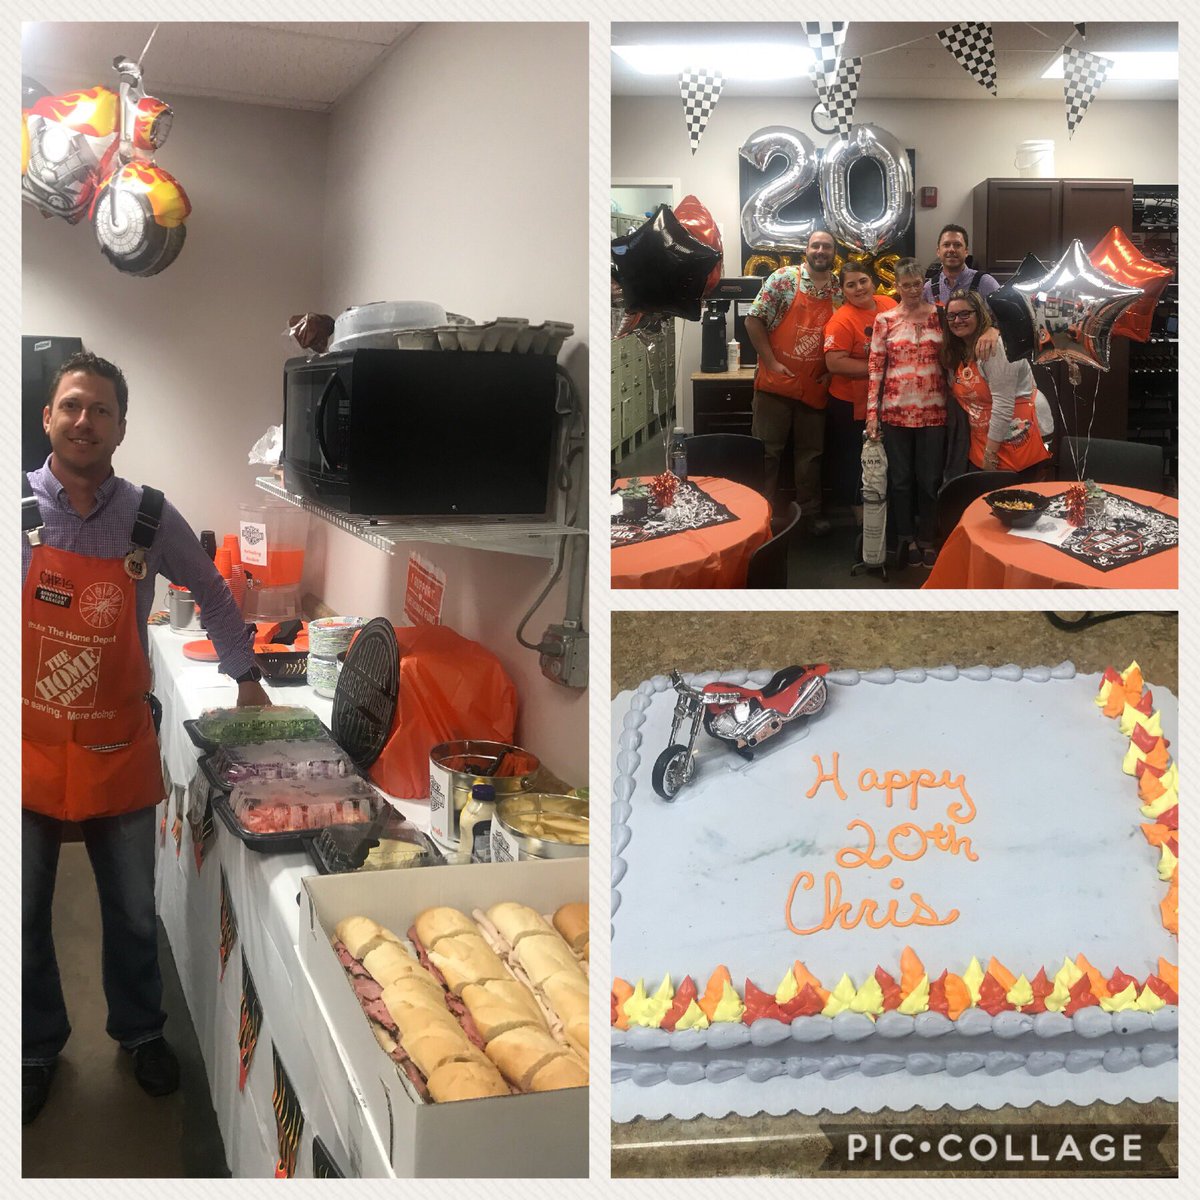 Happy 20th Anniv Chris Fields!Store 2785 @bobsaniga @troyer_paige @anbenner926 @homedepot3River @Archiegraham17 @HouleHeather @Dave_Dawber @TimAdamsTHD